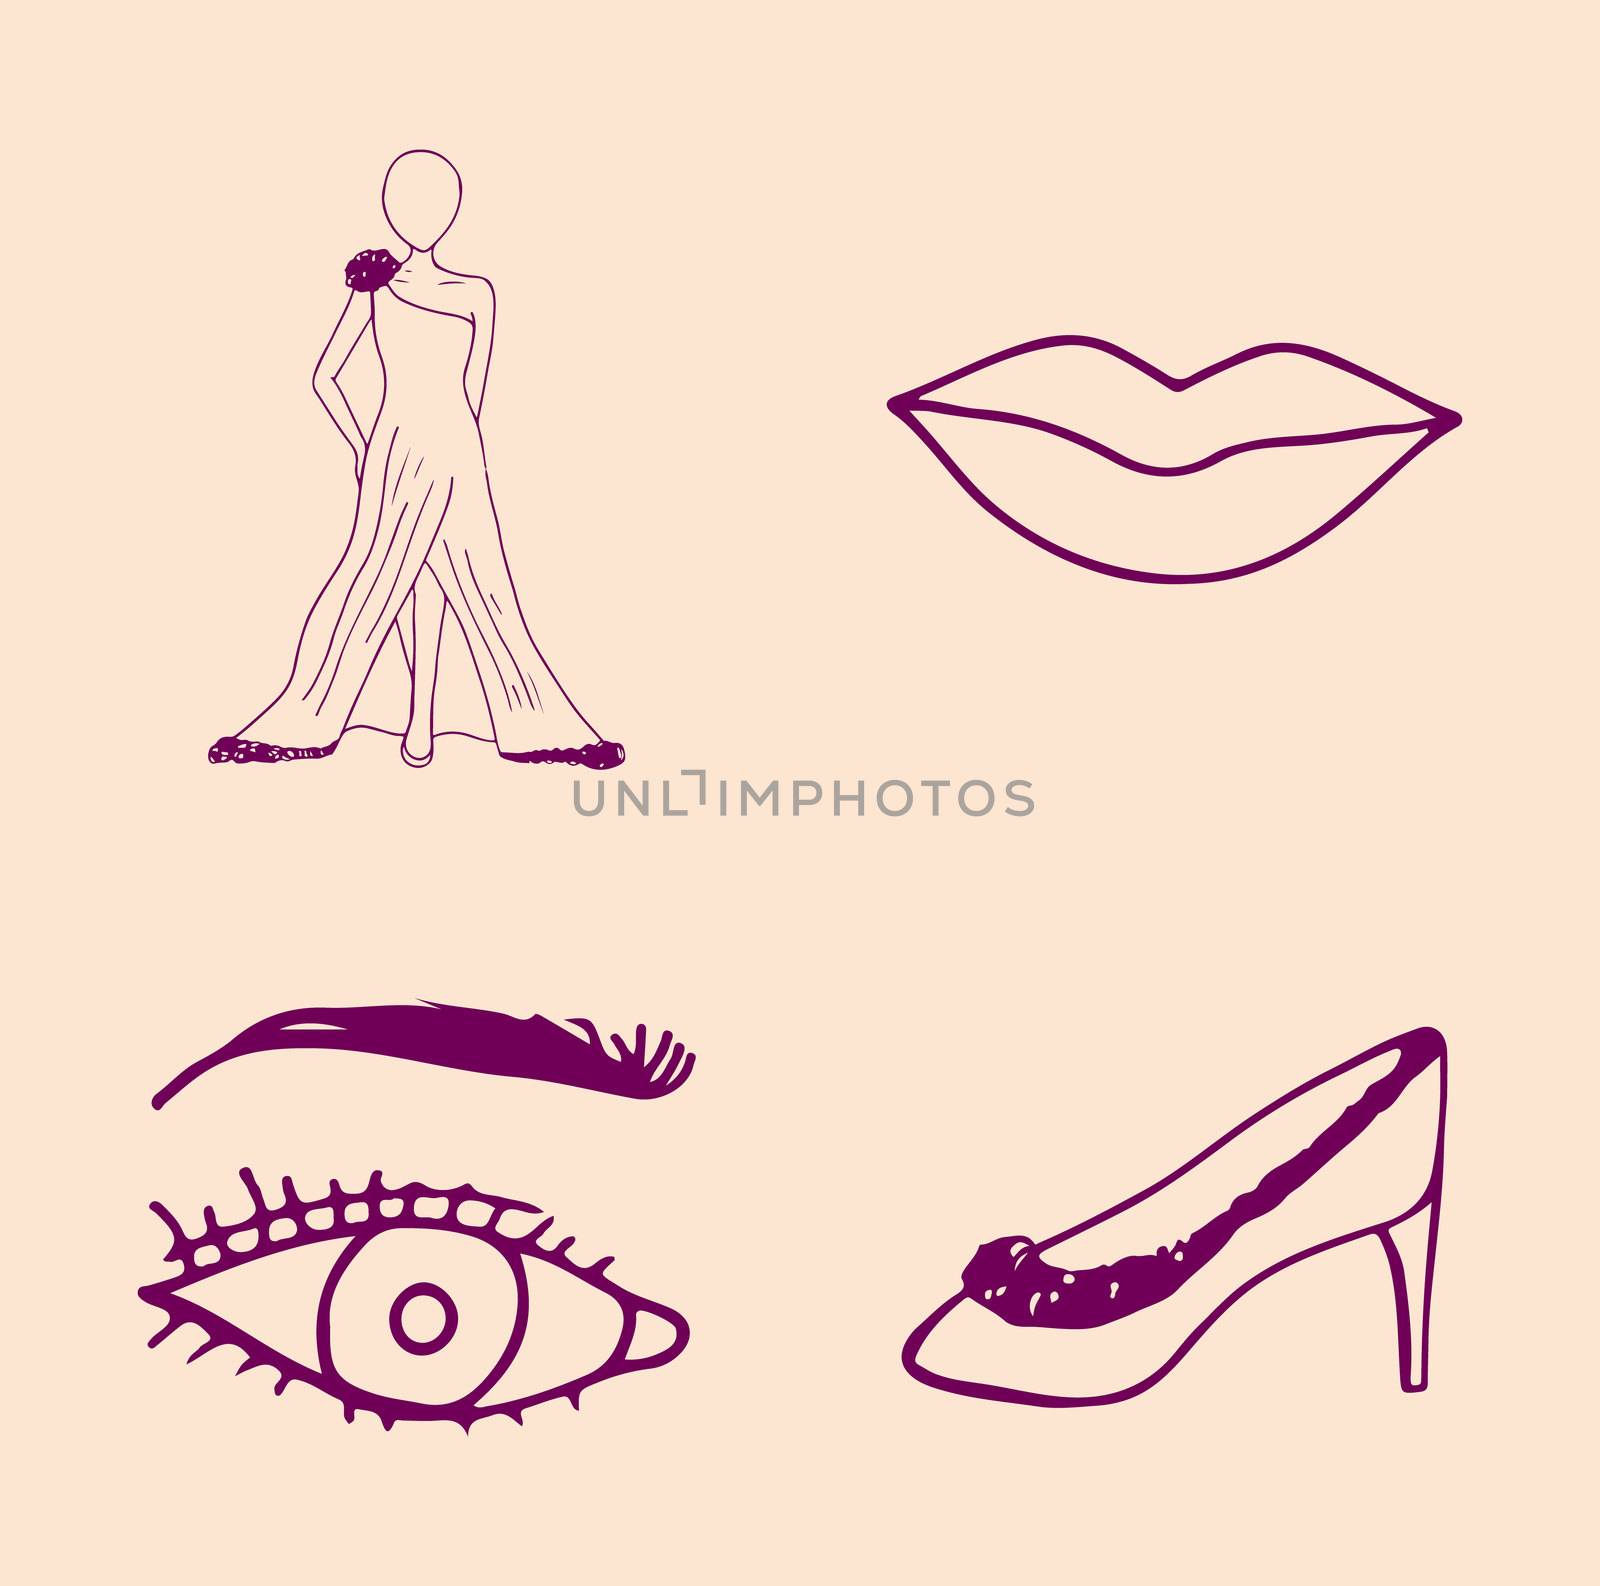 Vector set of fashion icons against yellow background